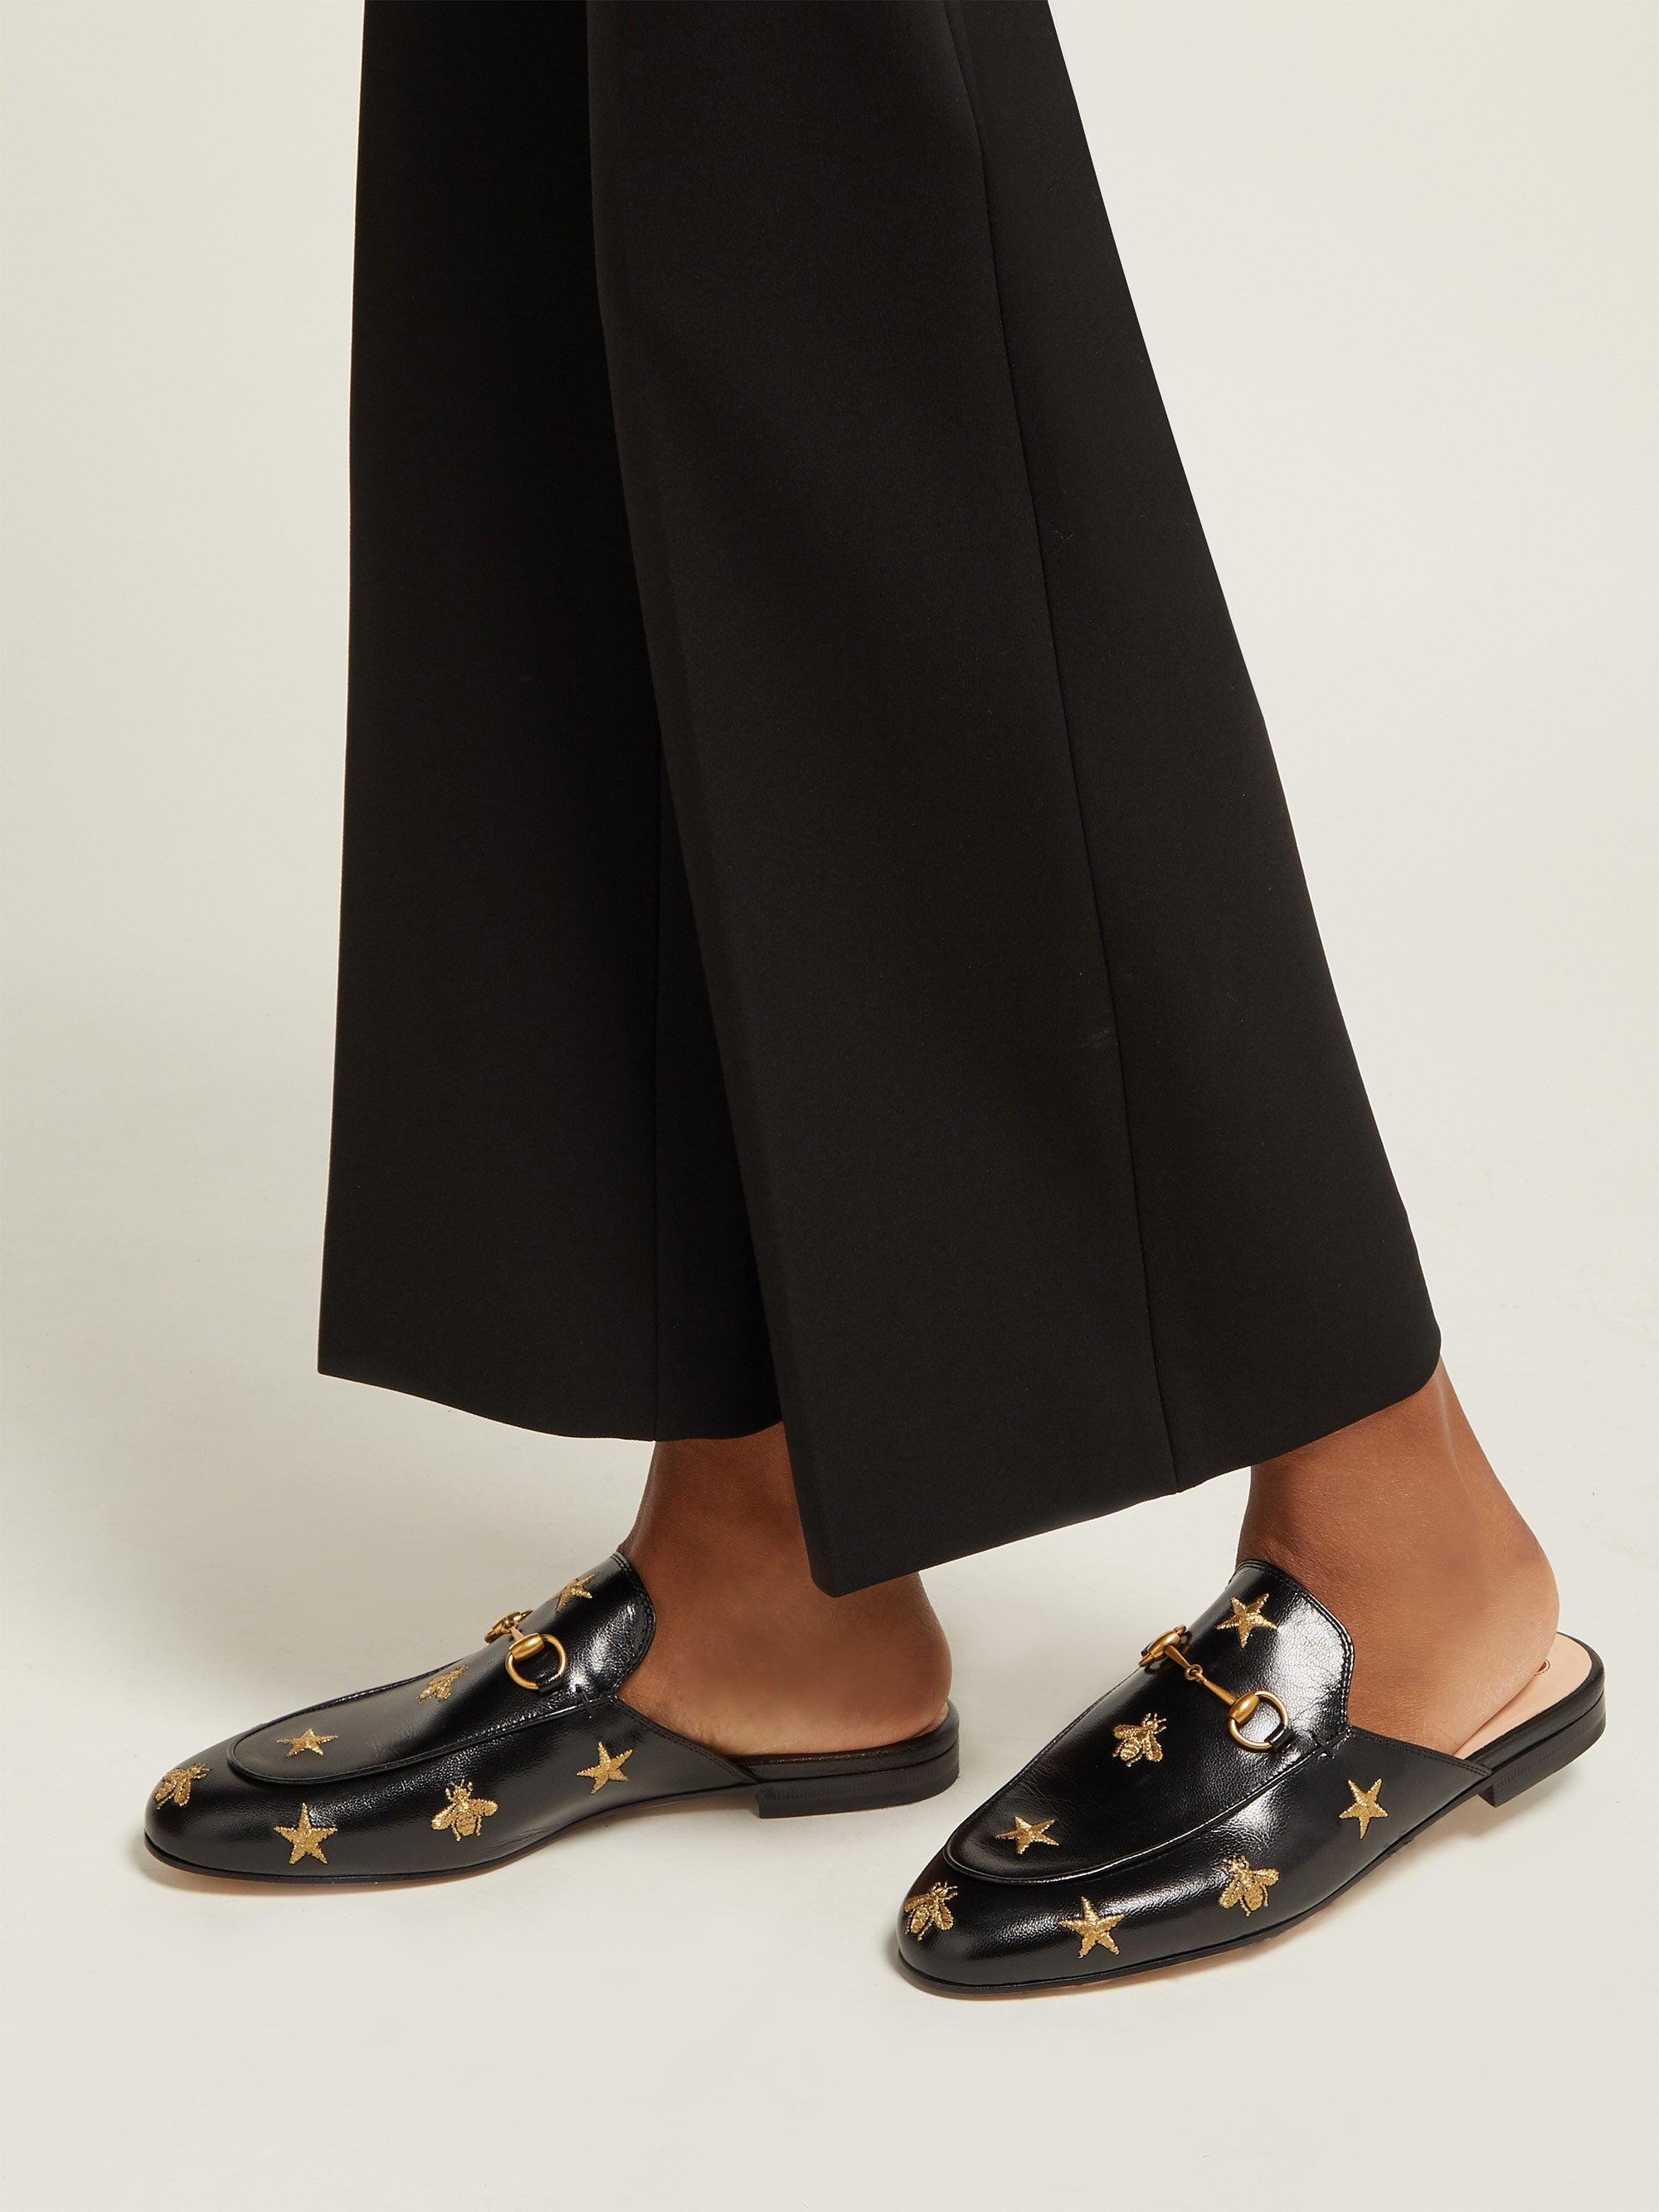 Gucci Princetown Embroidered Leather Slipper in Black | Lyst